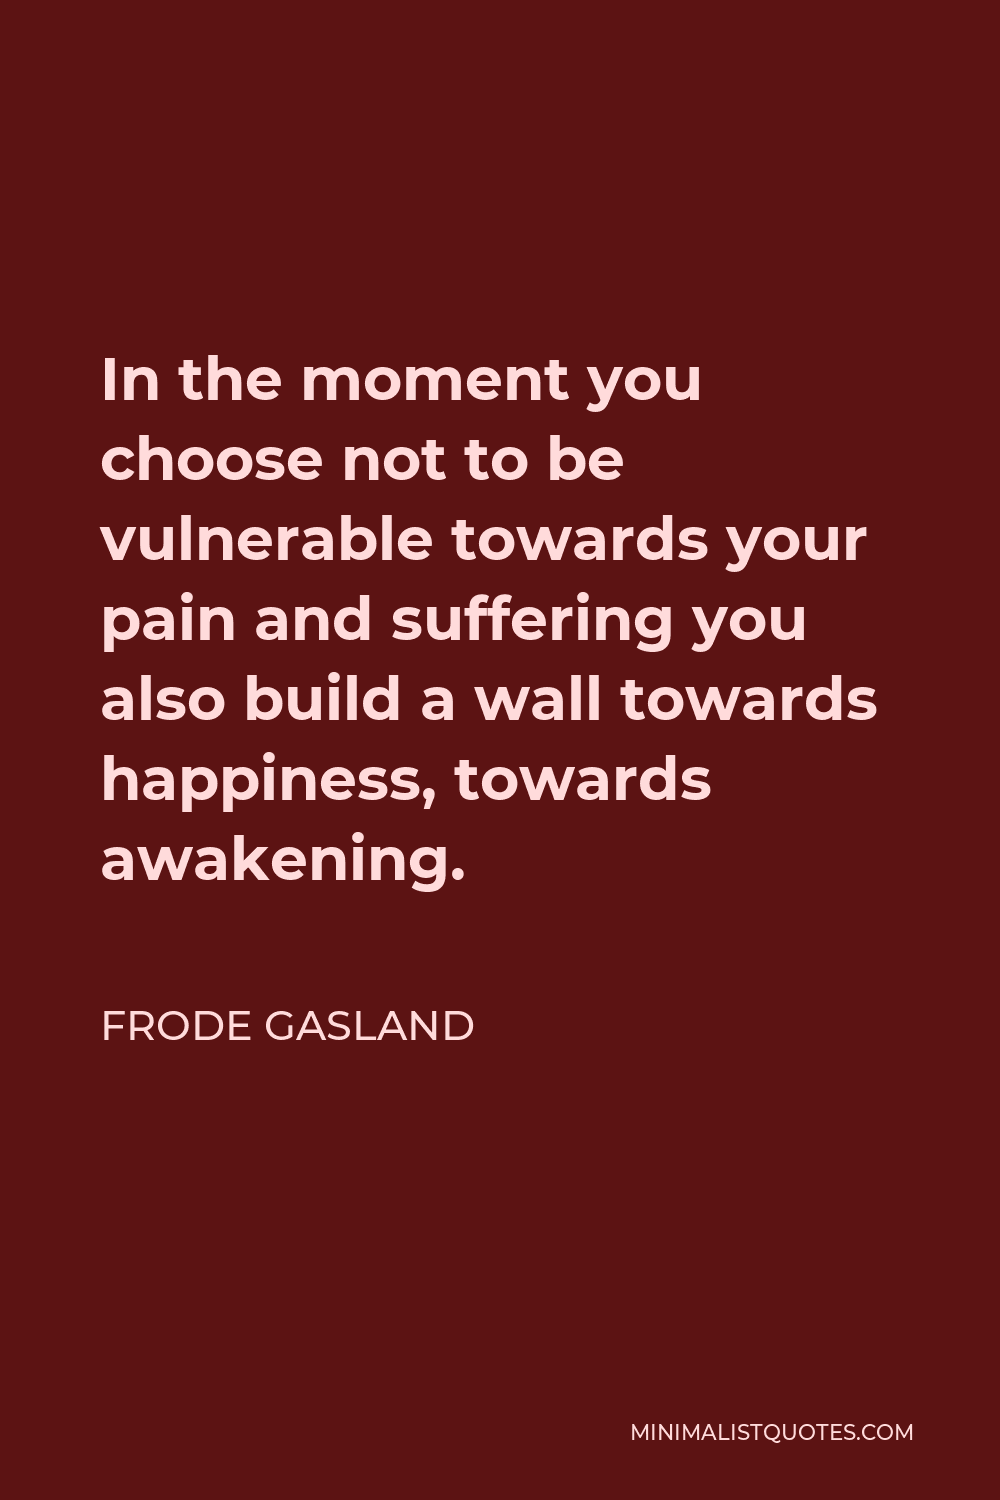 Frode Gasland Quote - In the moment you choose not to be vulnerable towards your pain and suffering you also build a wall towards happiness, towards awakening.